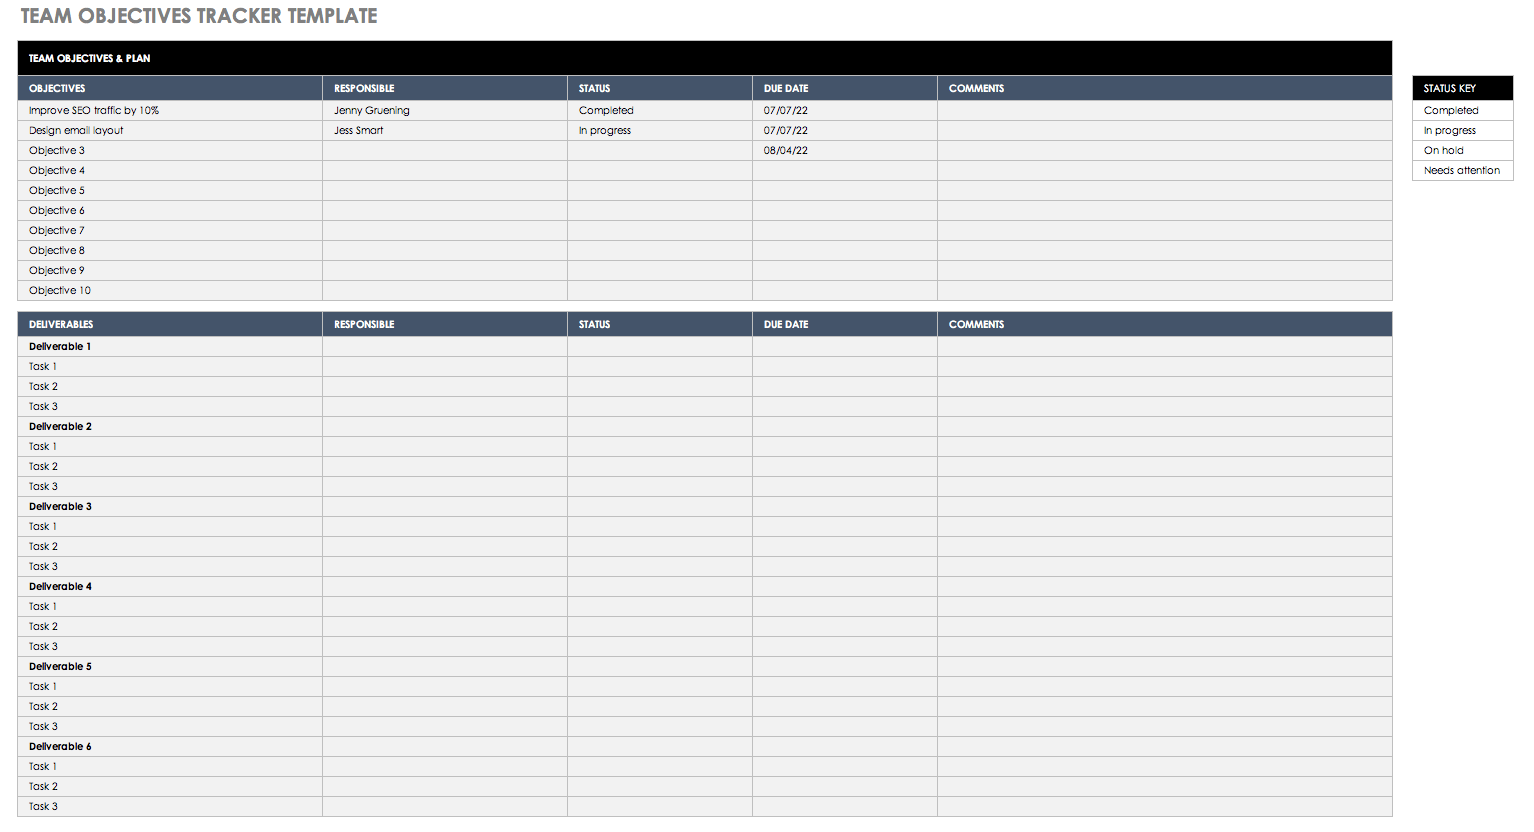 Team Objectives Tracker Template